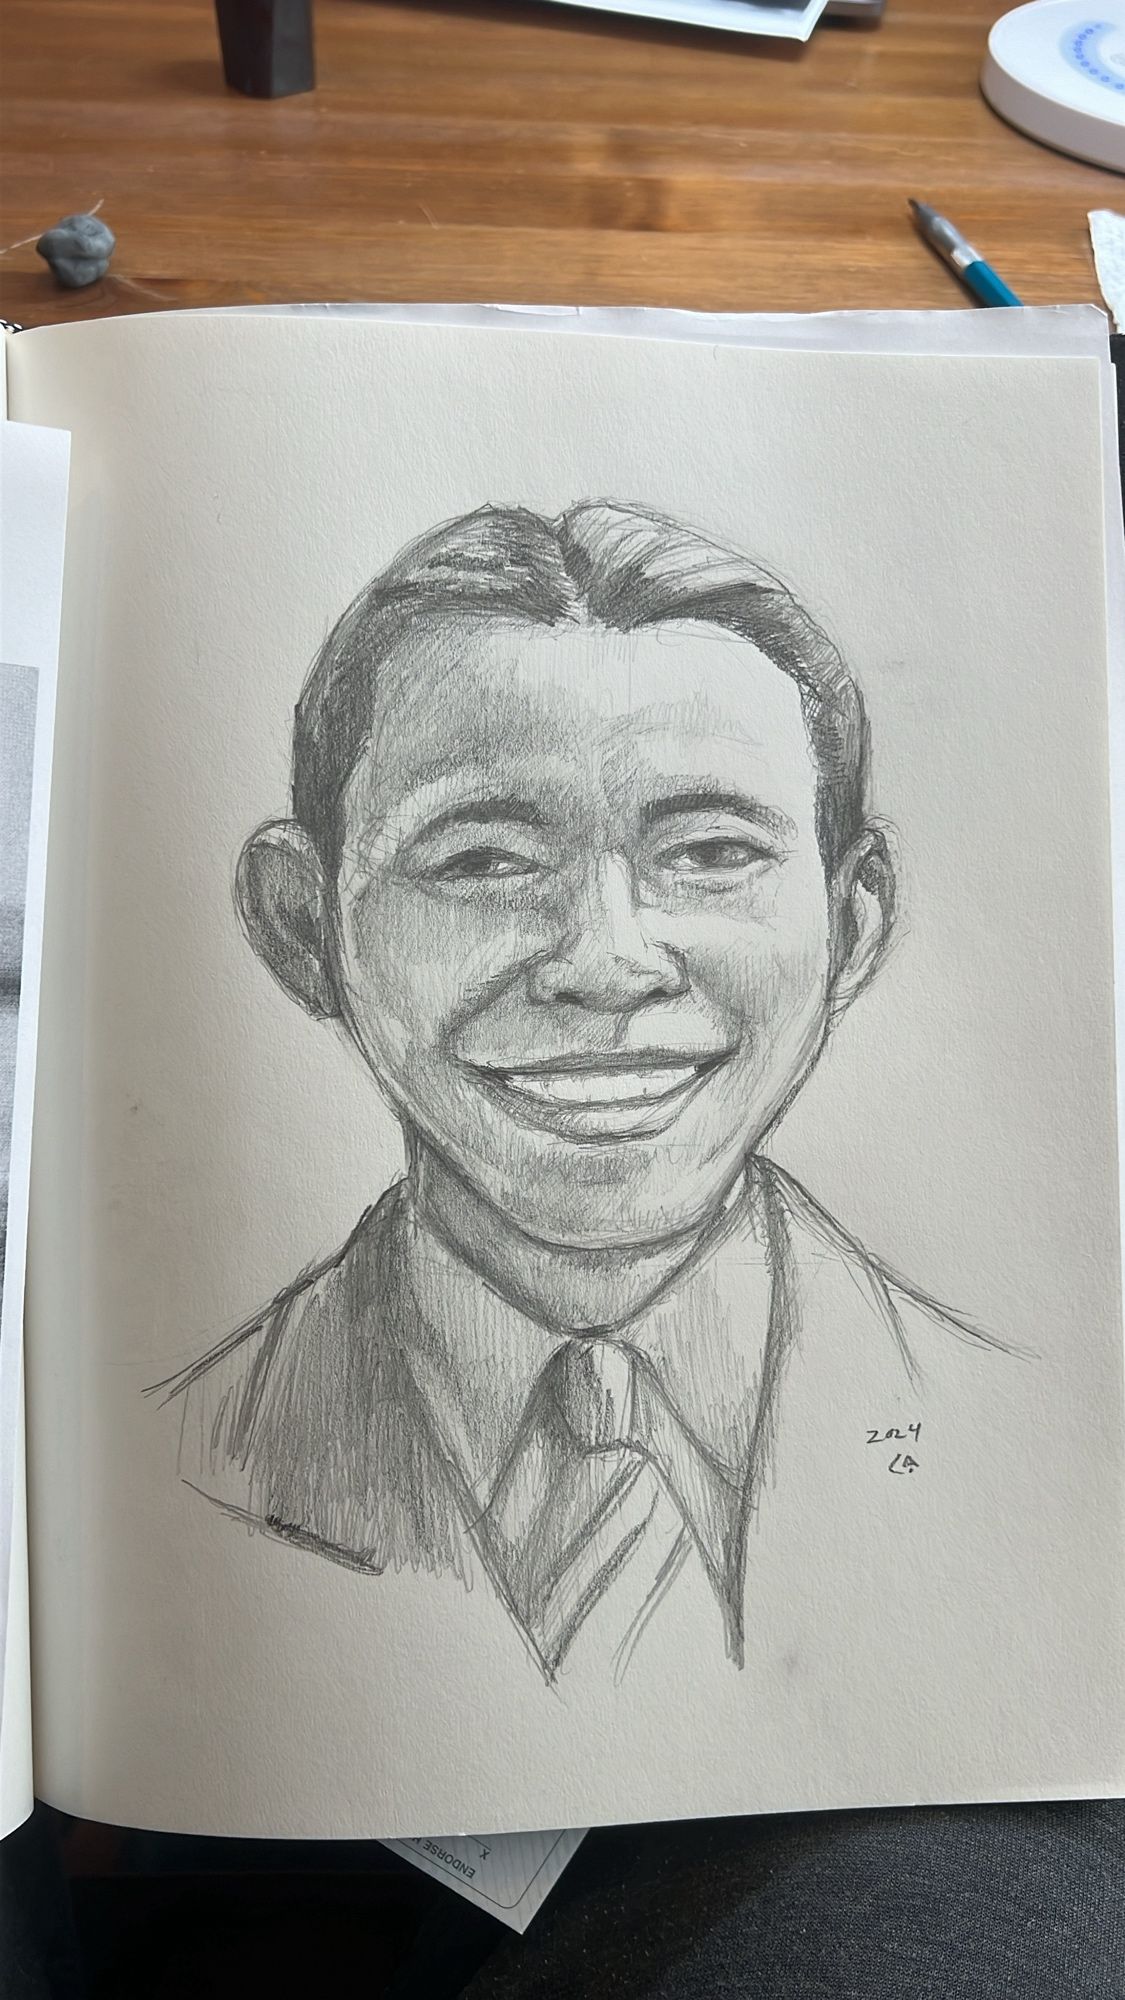 Carl Angel on LinkedIn: The completed sketch of Pedro Flores from this ...